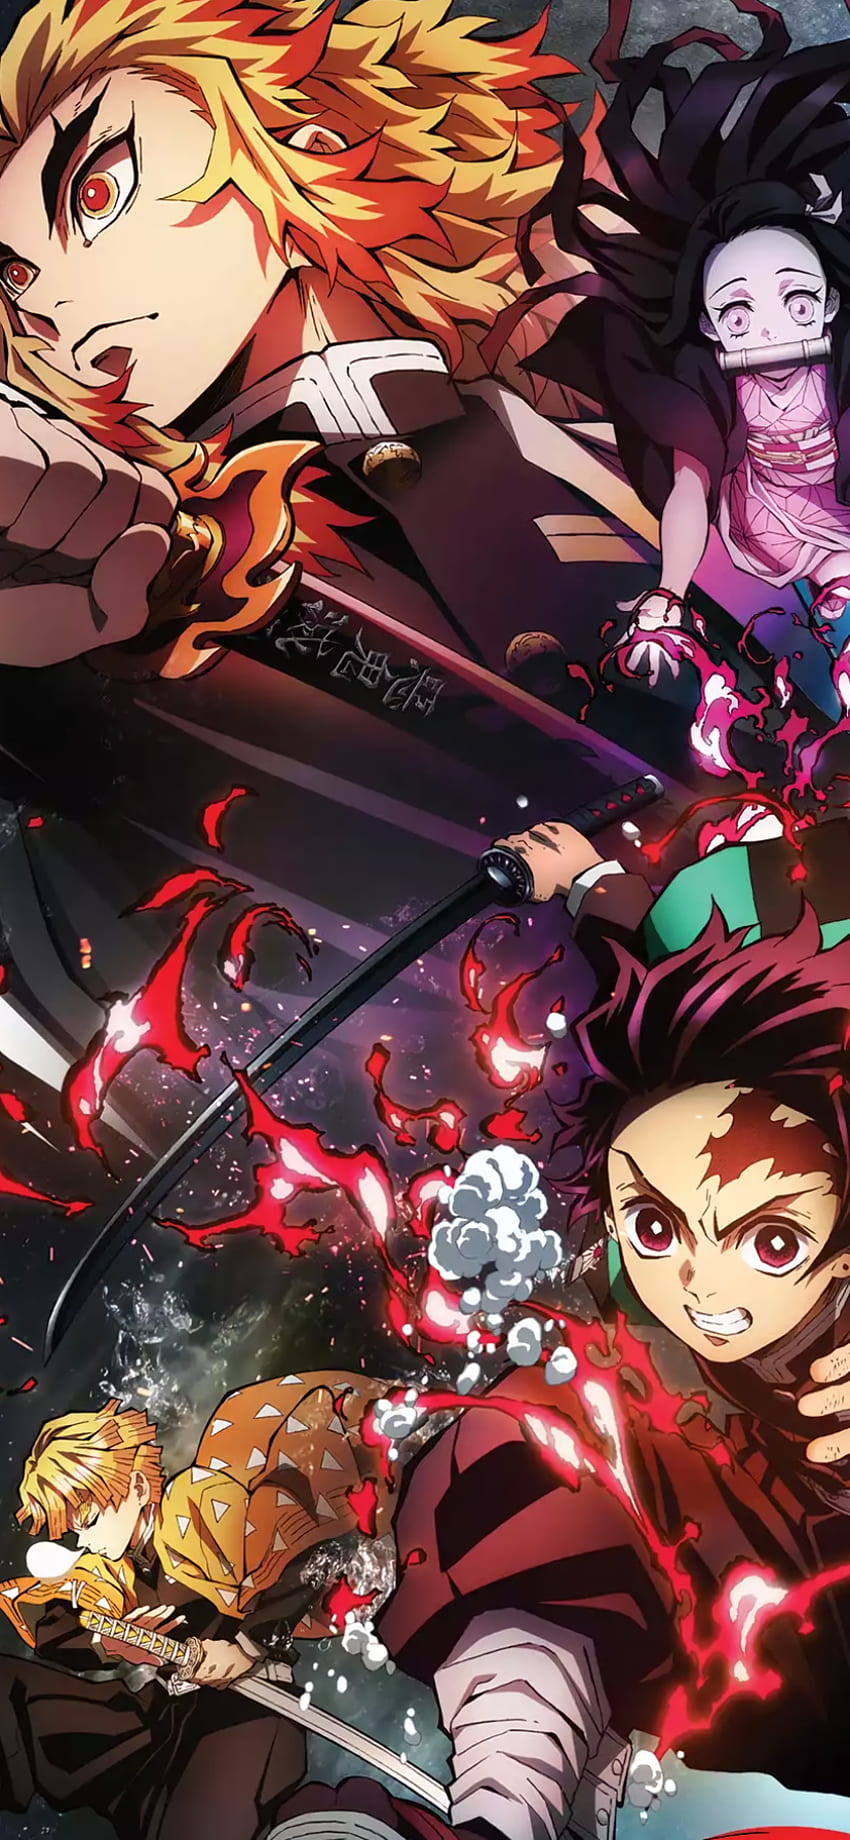 Demon Slayer movie review: Mugen Train is action anime worthy of hype -  Polygon